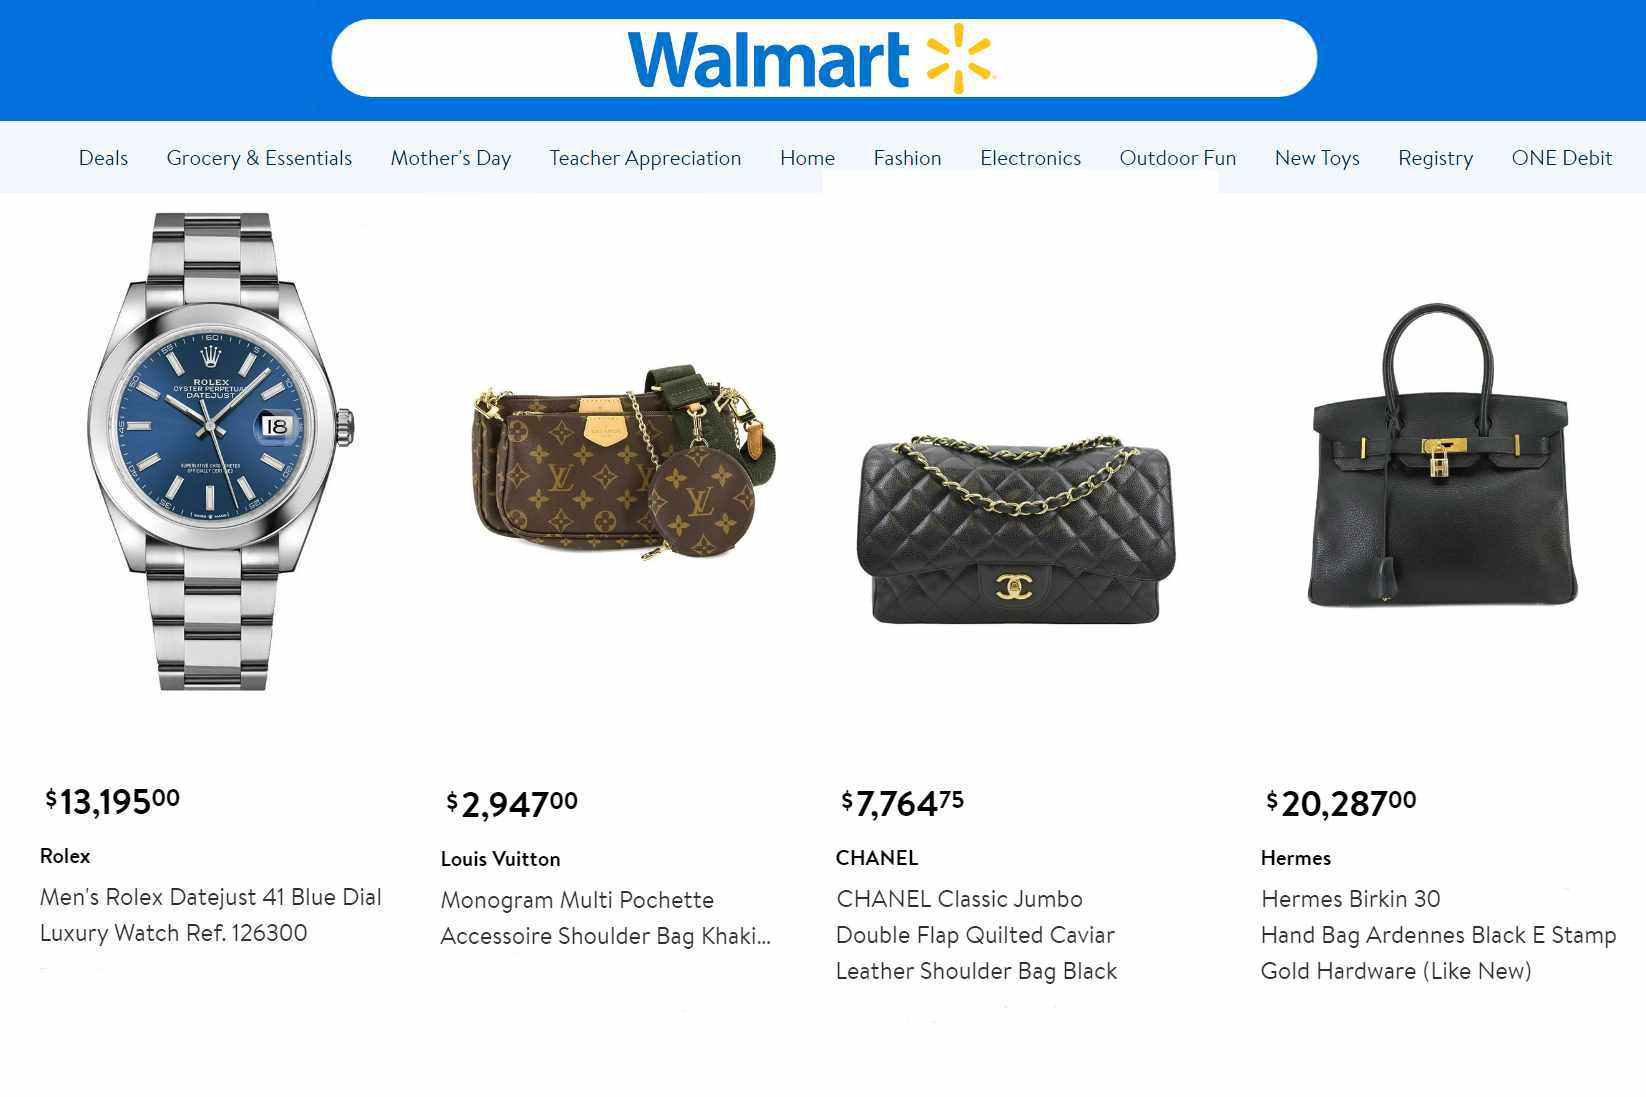 Why Does Walmart Sell Birkin Bags & Rolex Watches?